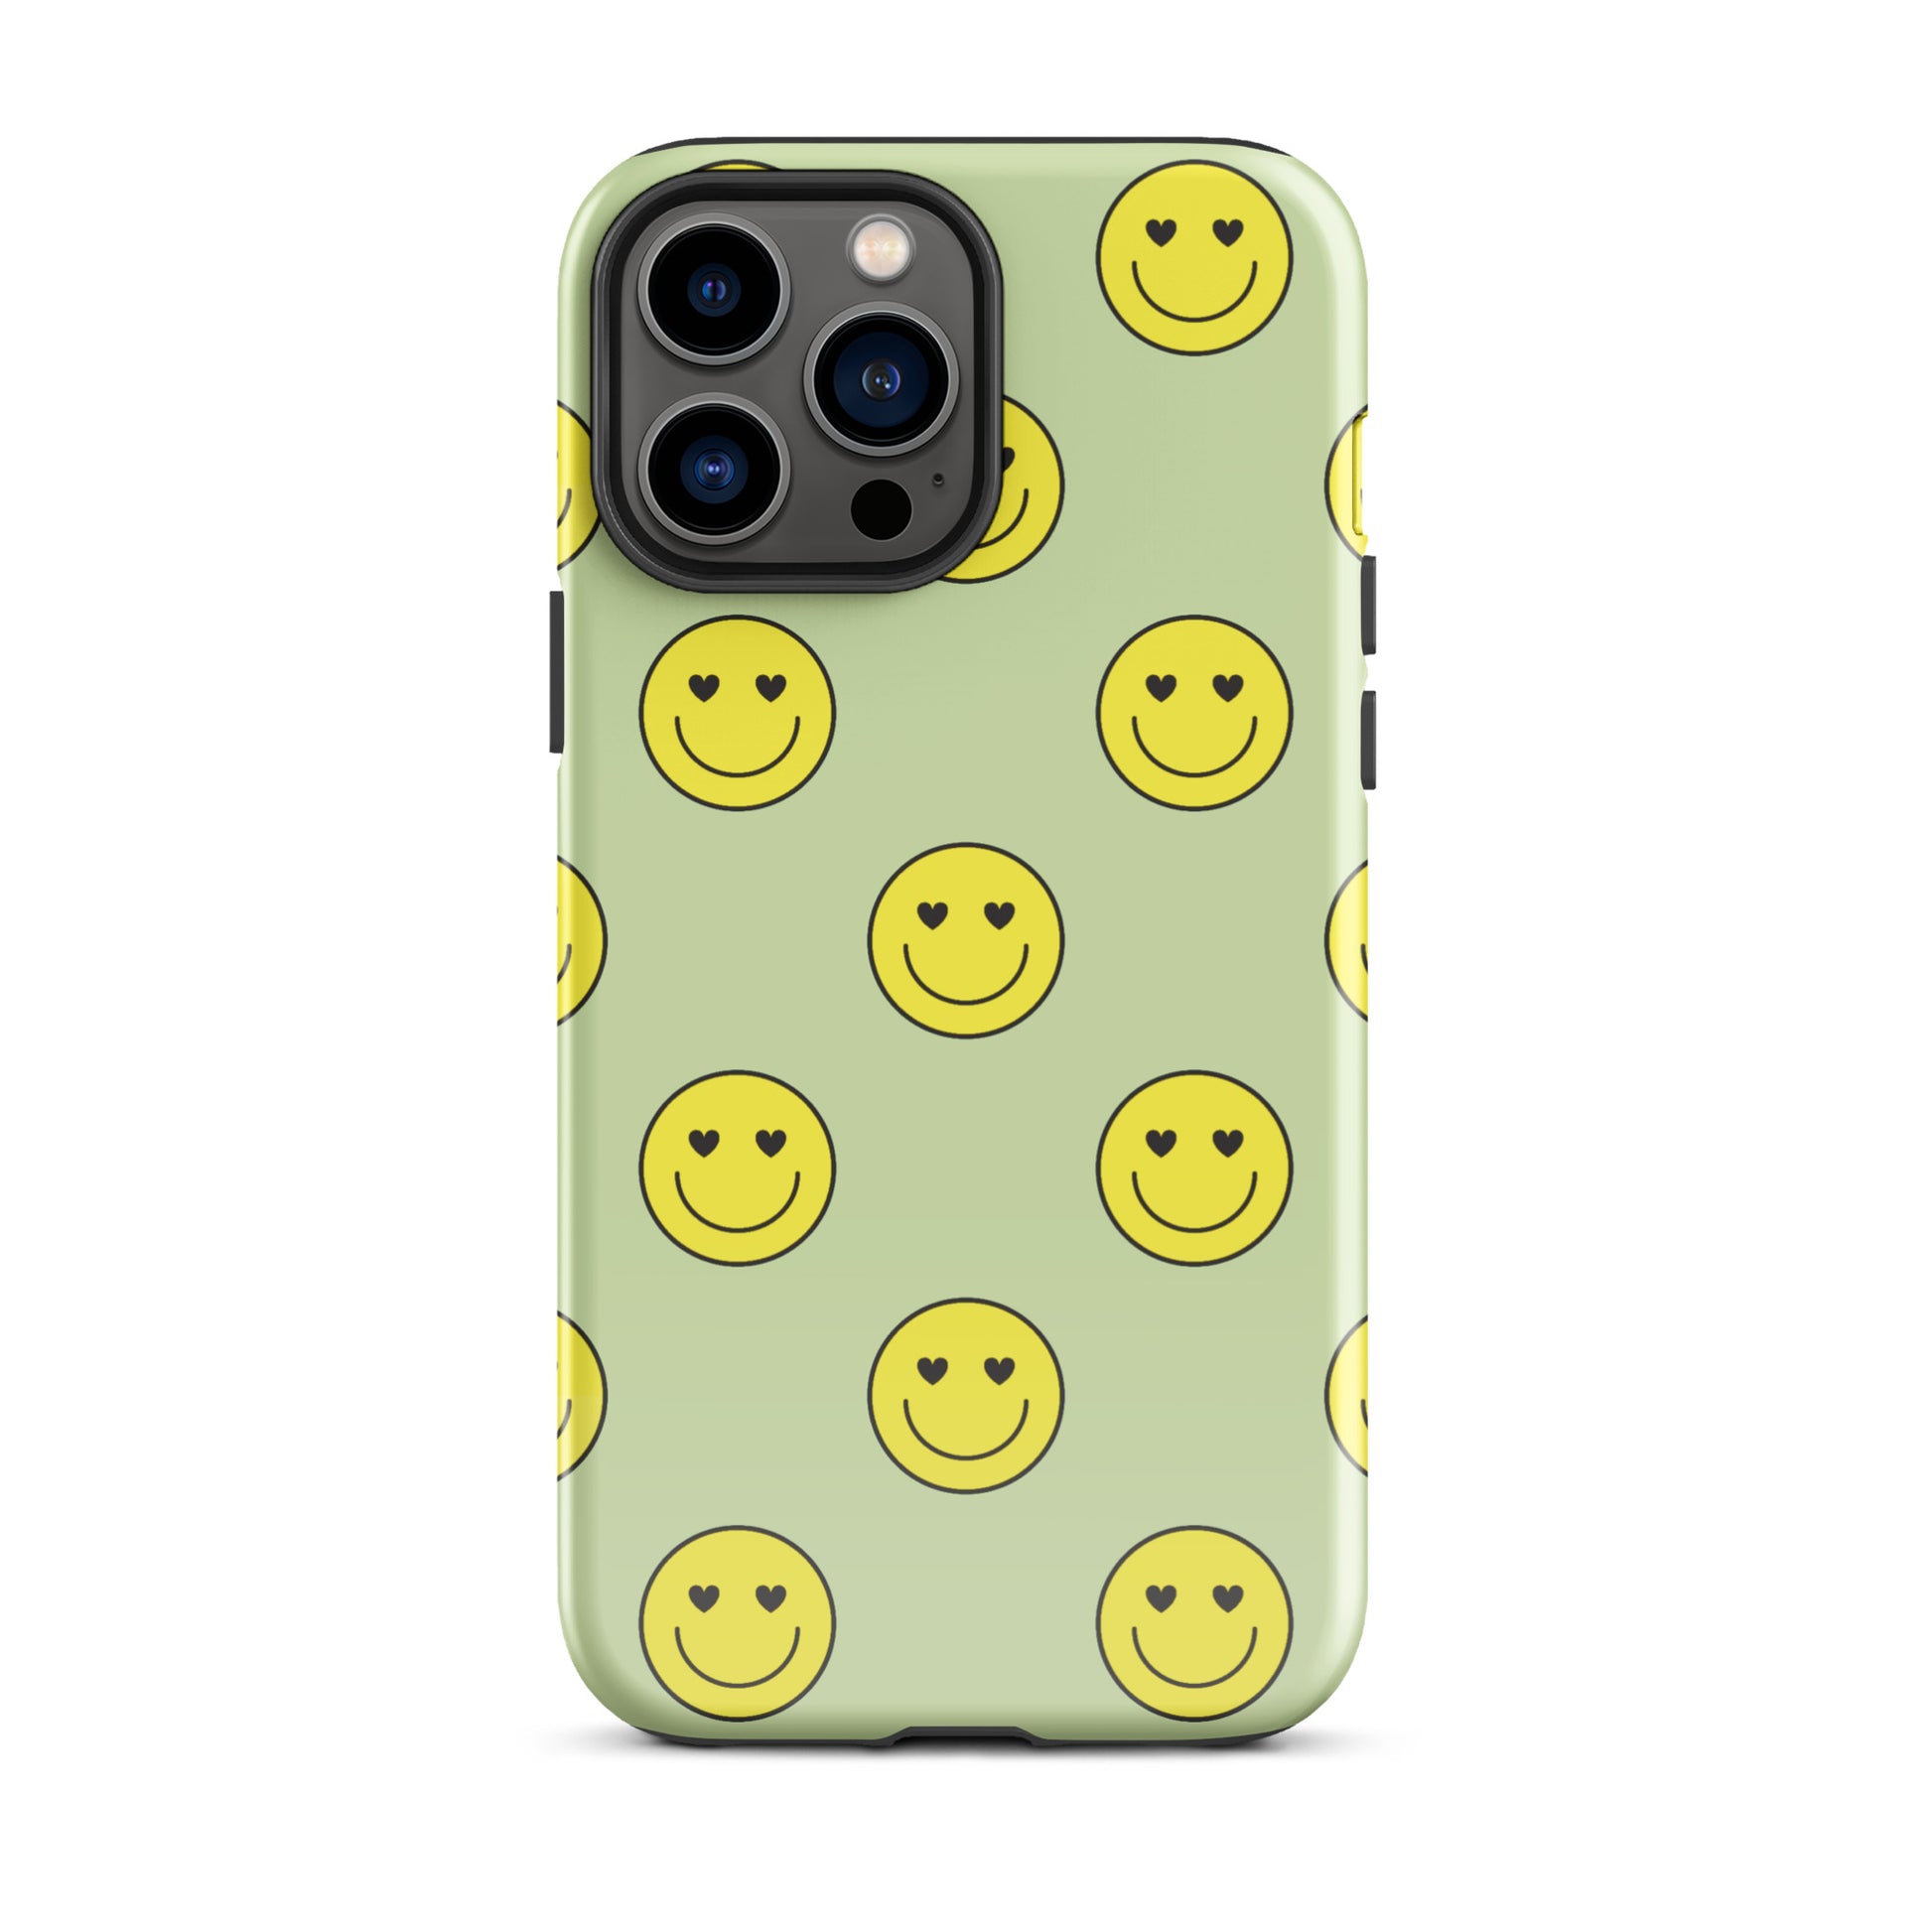 Neon Smiley Faces iPhone Case iPhone 13 Pro Max Glossy